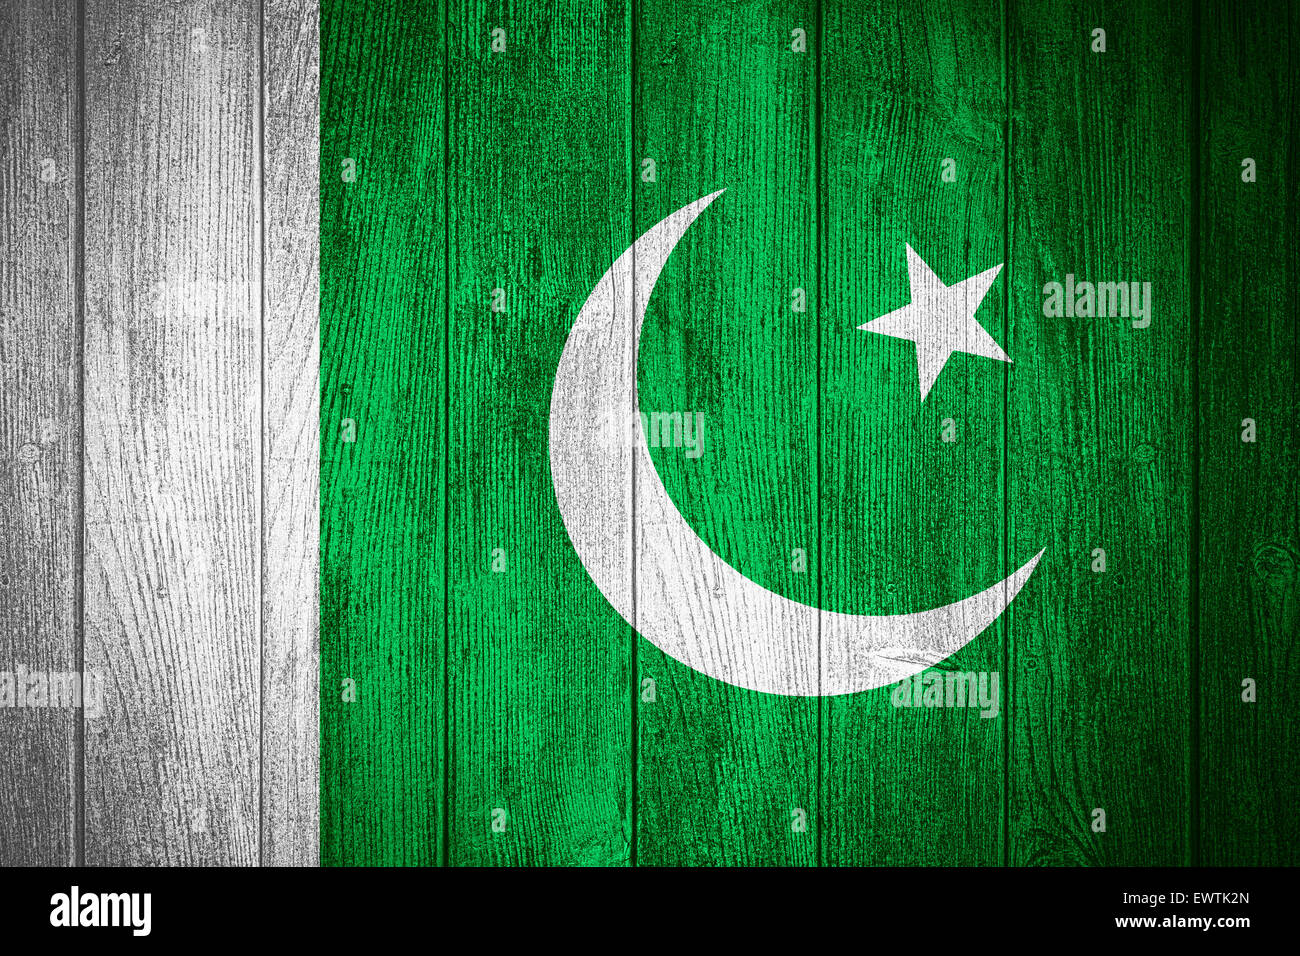 Pakistan flag or Pakistani banner on wooden boards background Stock Photo